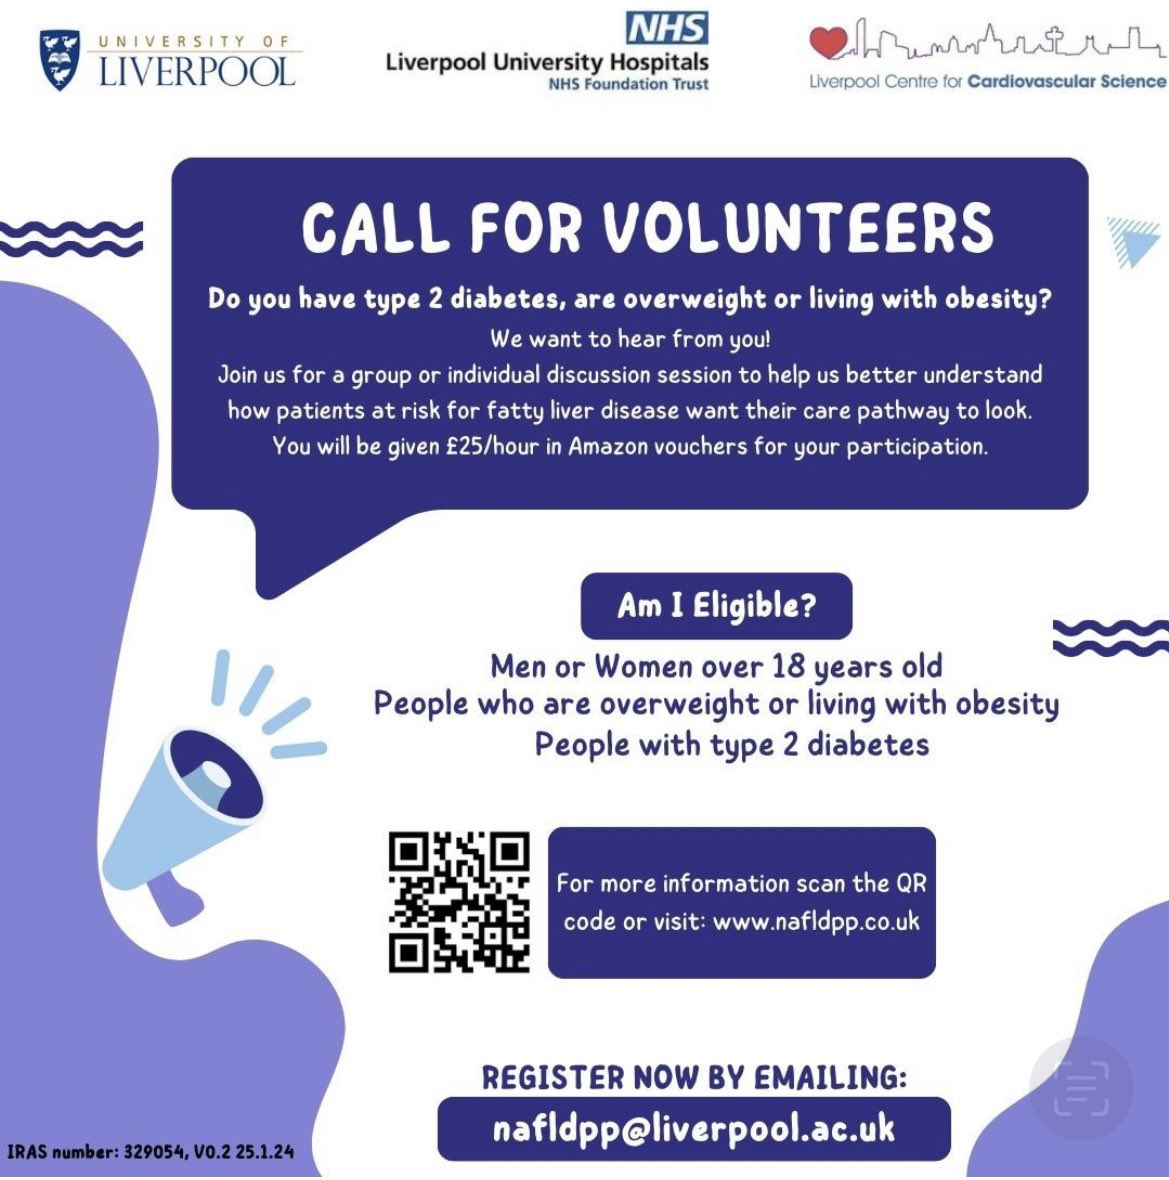 What do patients want MASLD care to look like? Call for participants with or at risk of #MASLD to join our qualitative study. Spread the word! @LiverpoolCCS @LivHospitals @LivUni @helengjarvis @IanARowe @ryanmbuch @katieawilliams_ @djrcuthbertson @LiverTrust @acmedsci